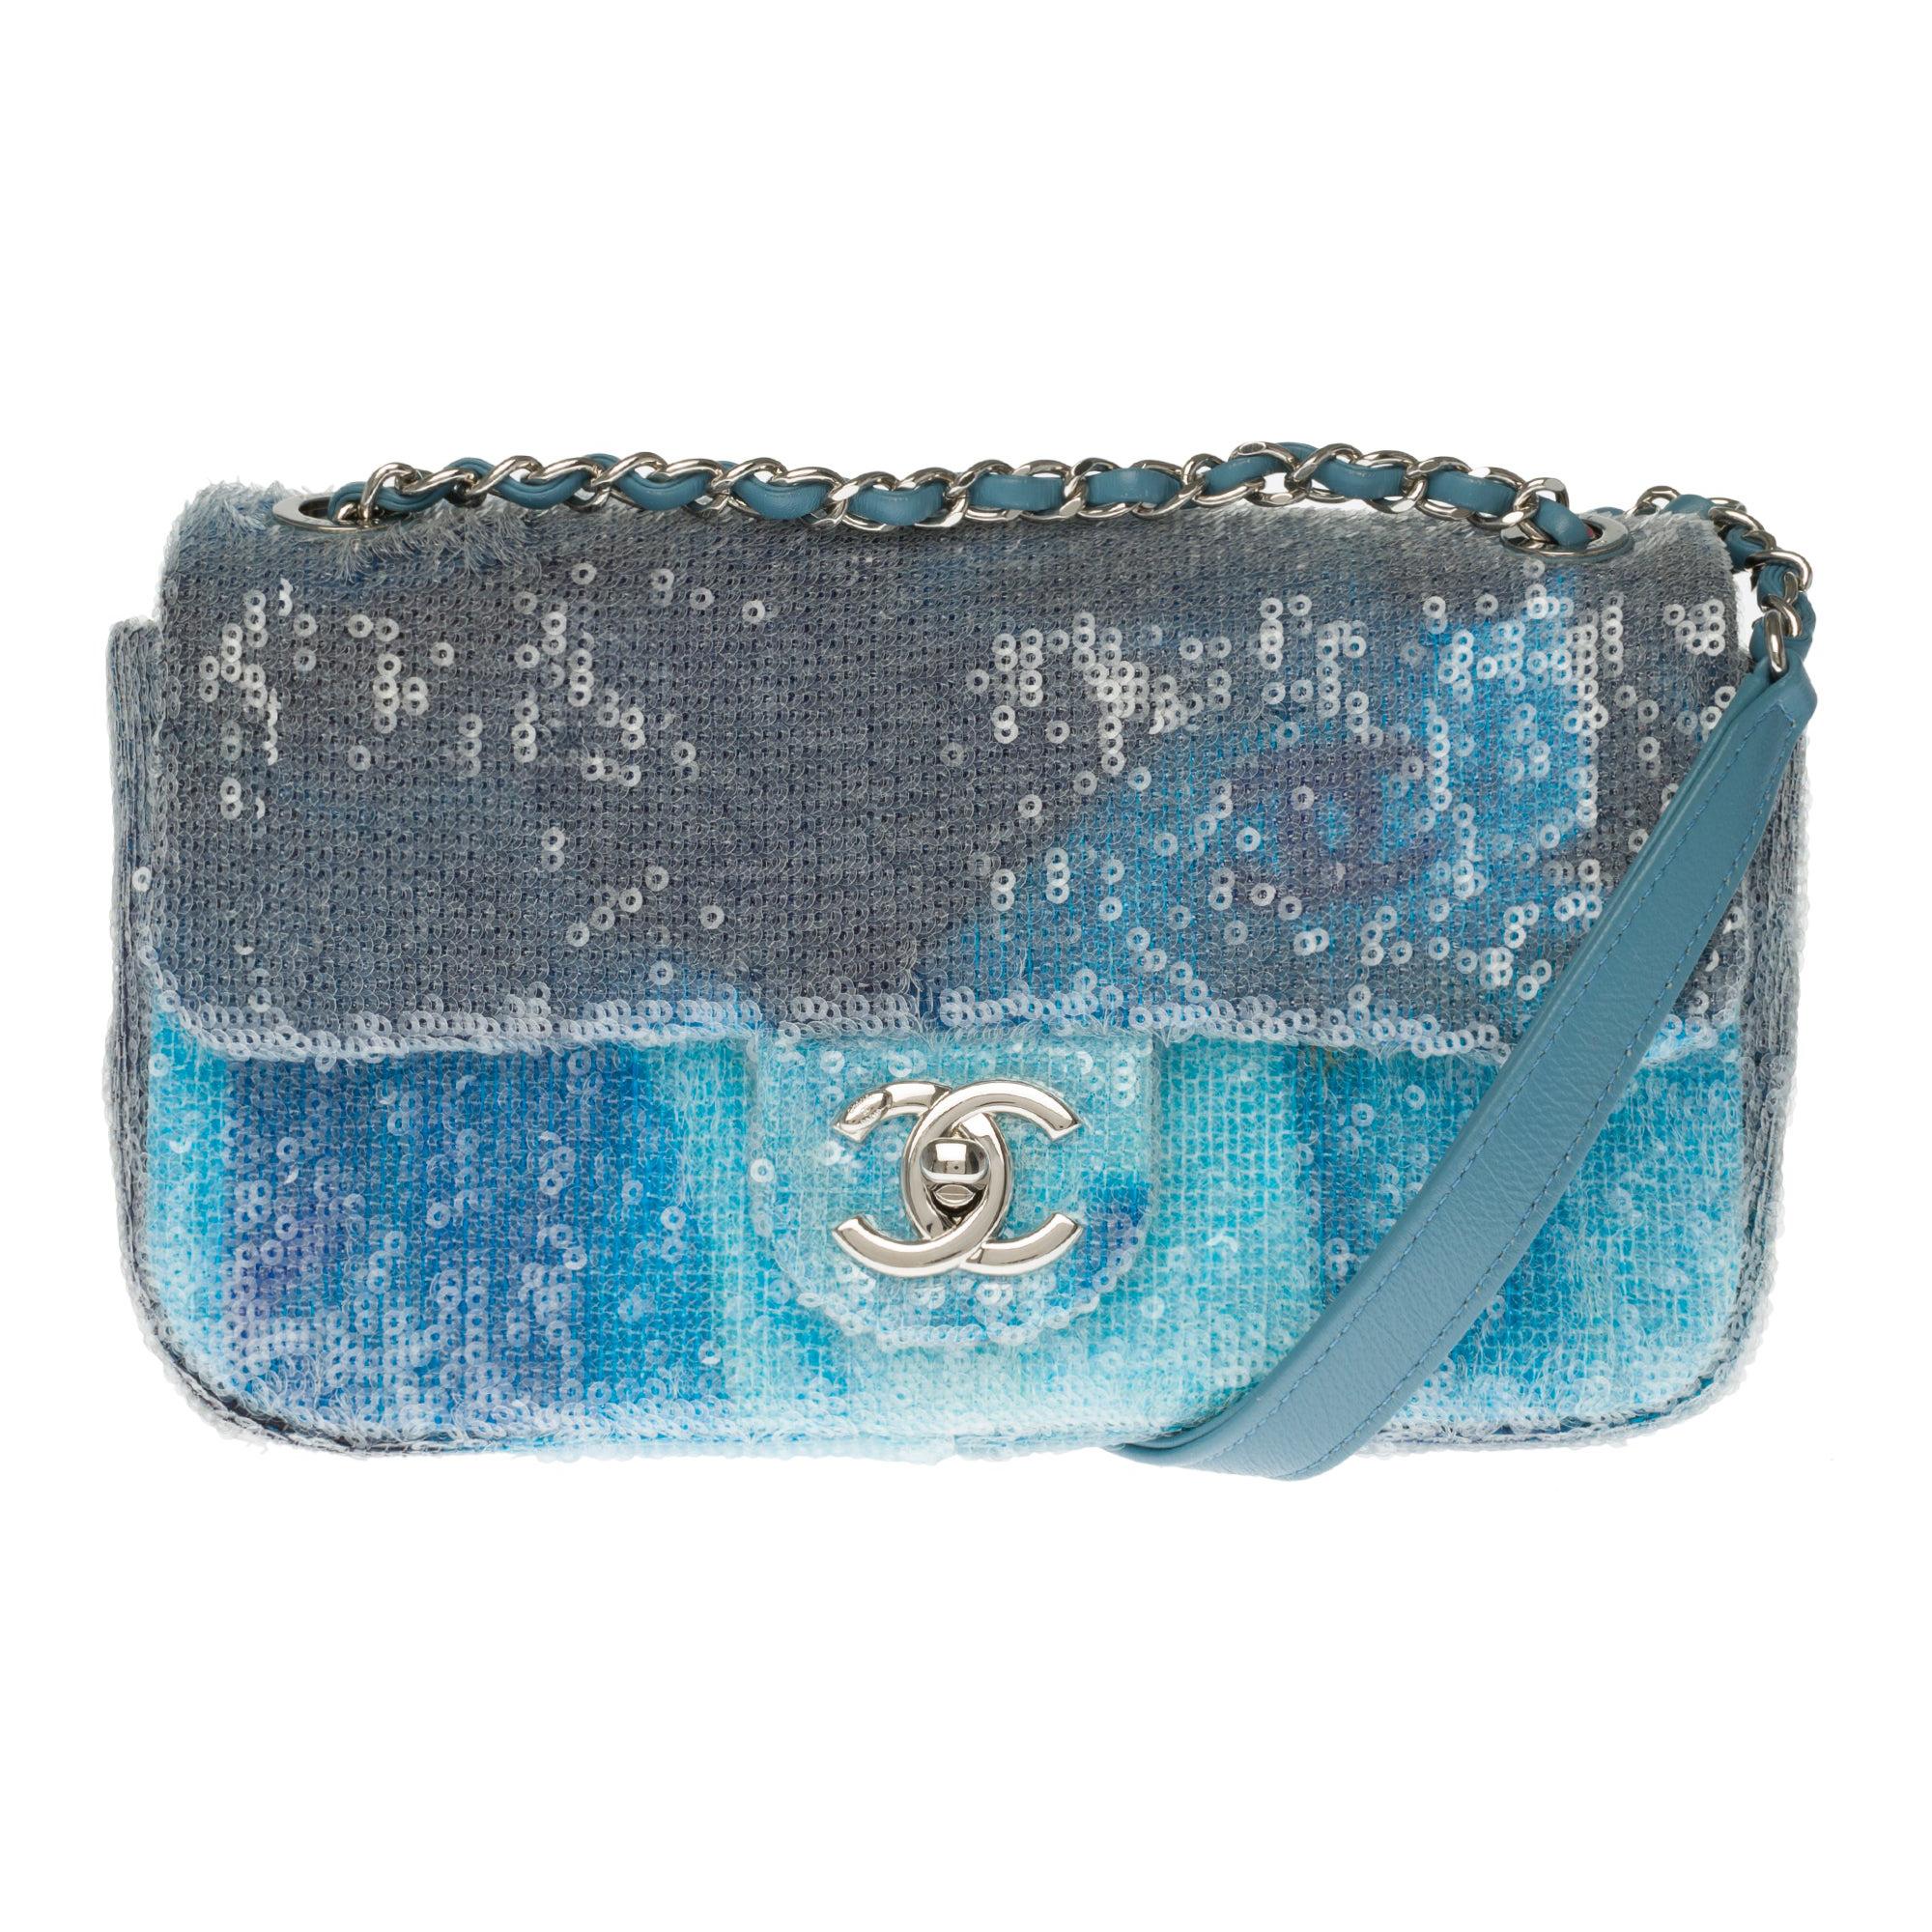 The Rare Chanel Timeless Runaway Waterfalls Shoulder bag in blue sequins ,  SHW at 1stDibs